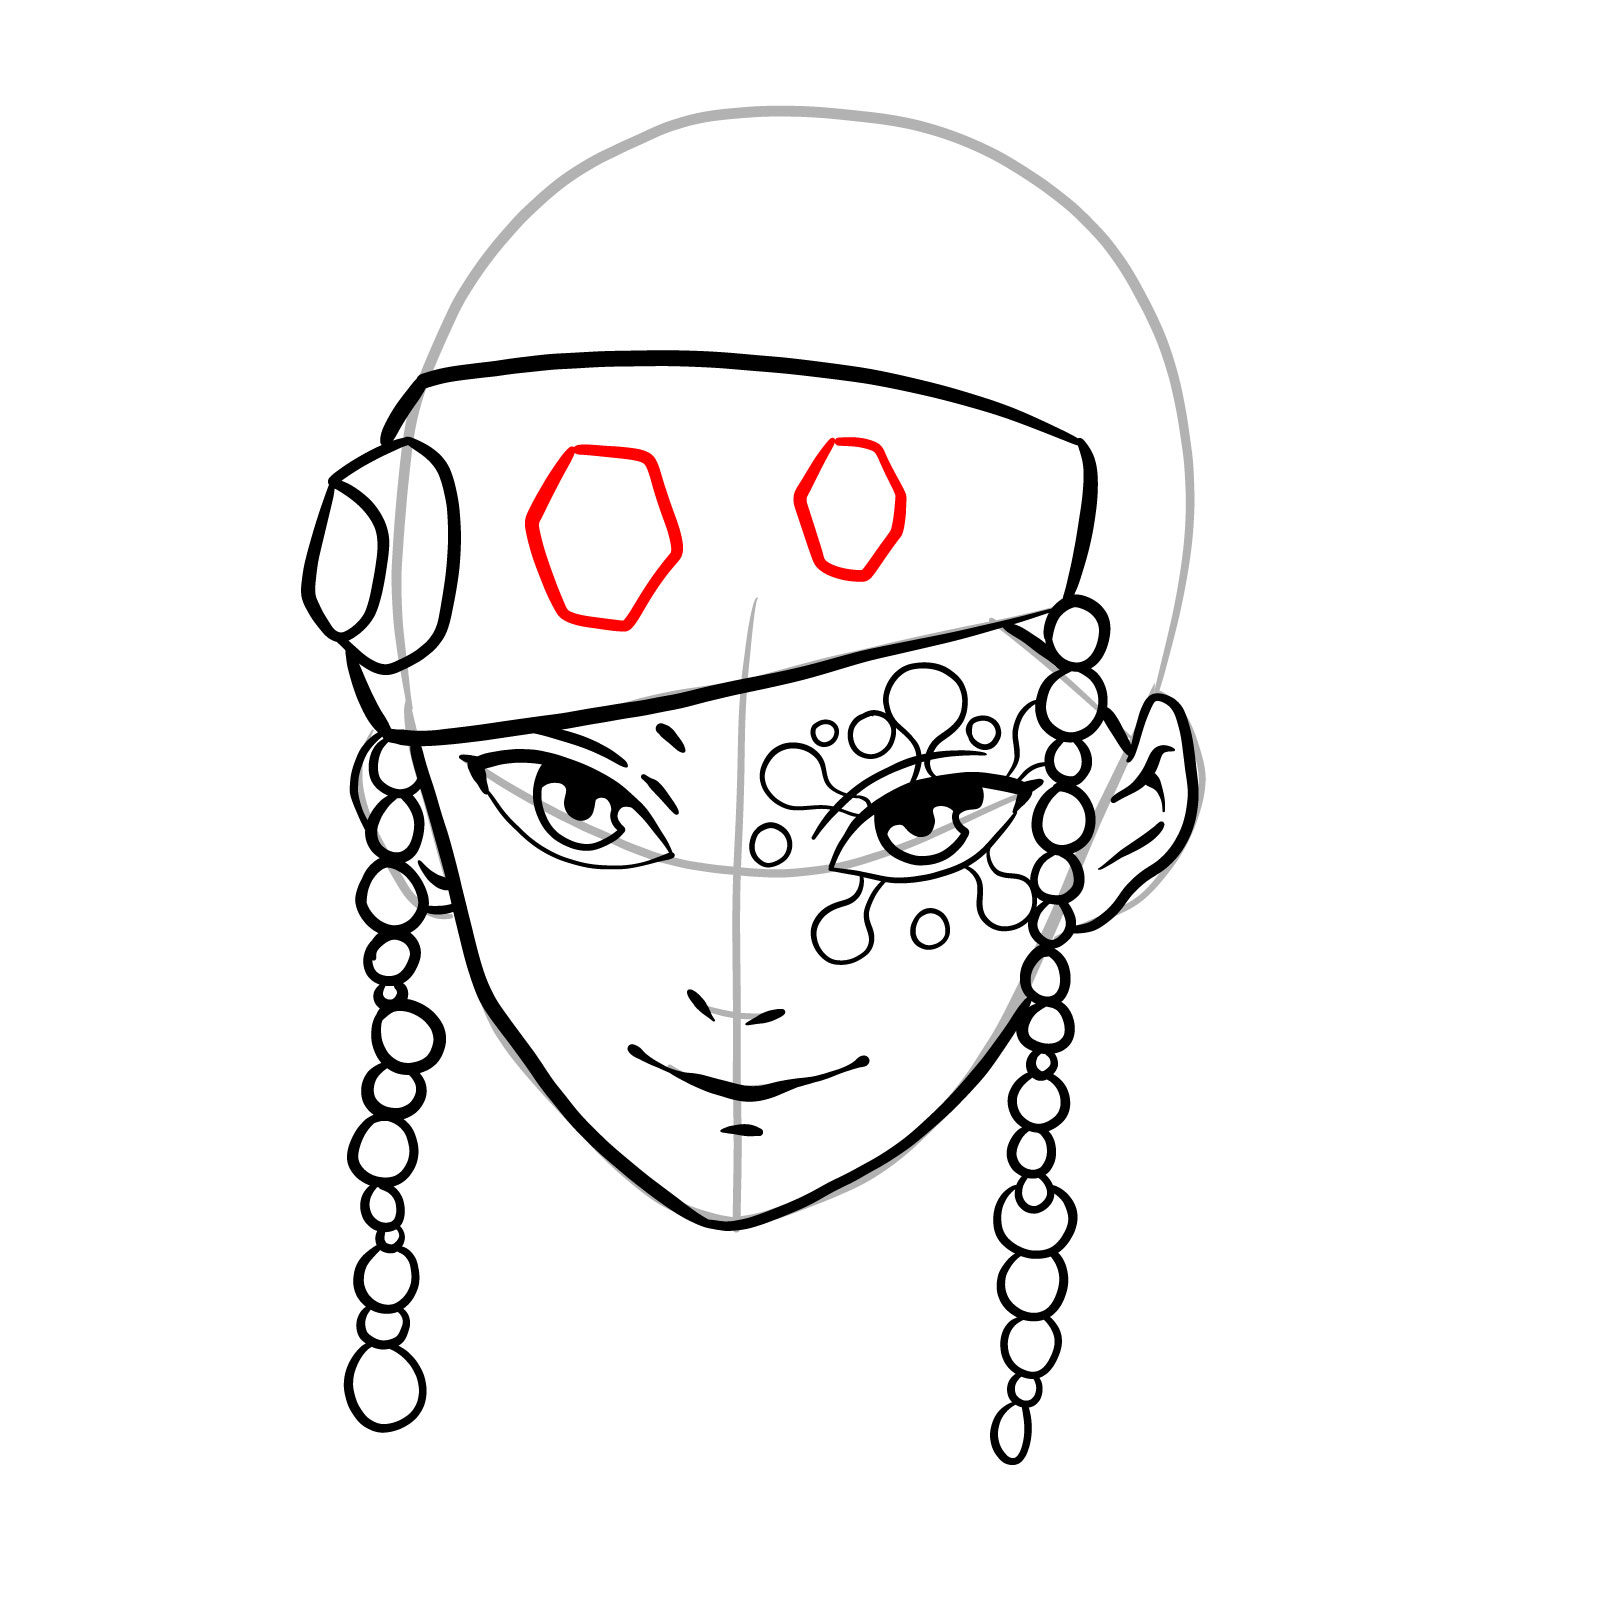 How to draw Lord Tengen's face - step 16